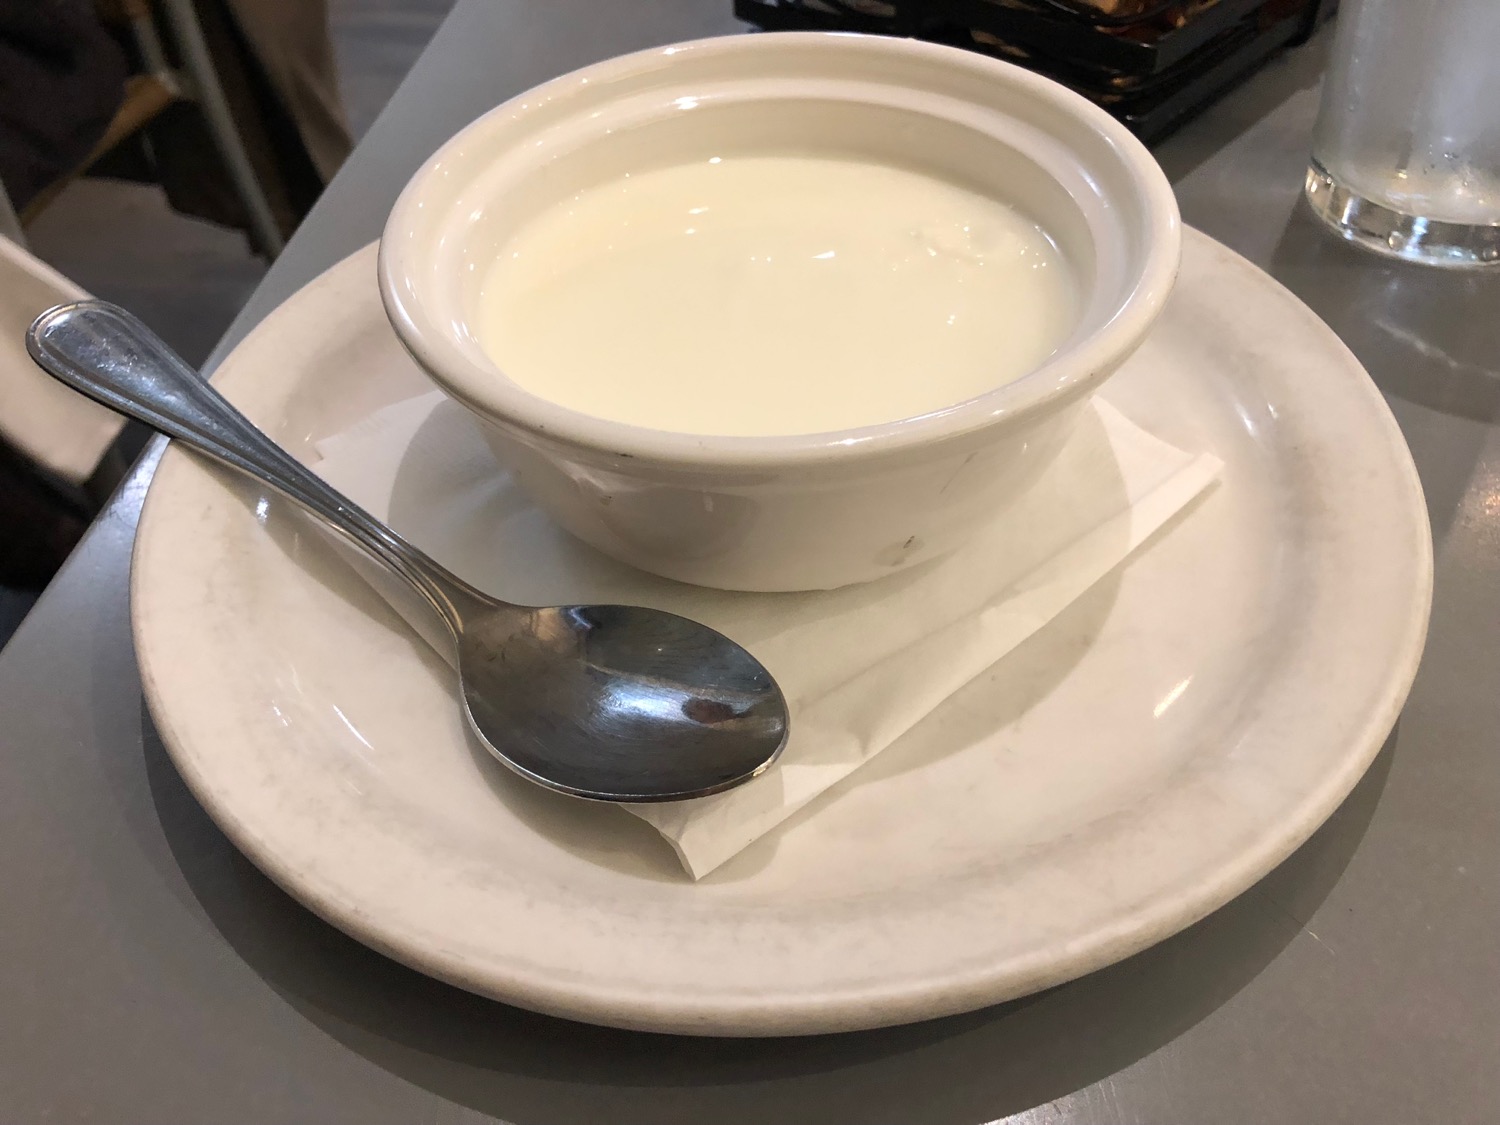 a bowl of milk on a plate with a spoon